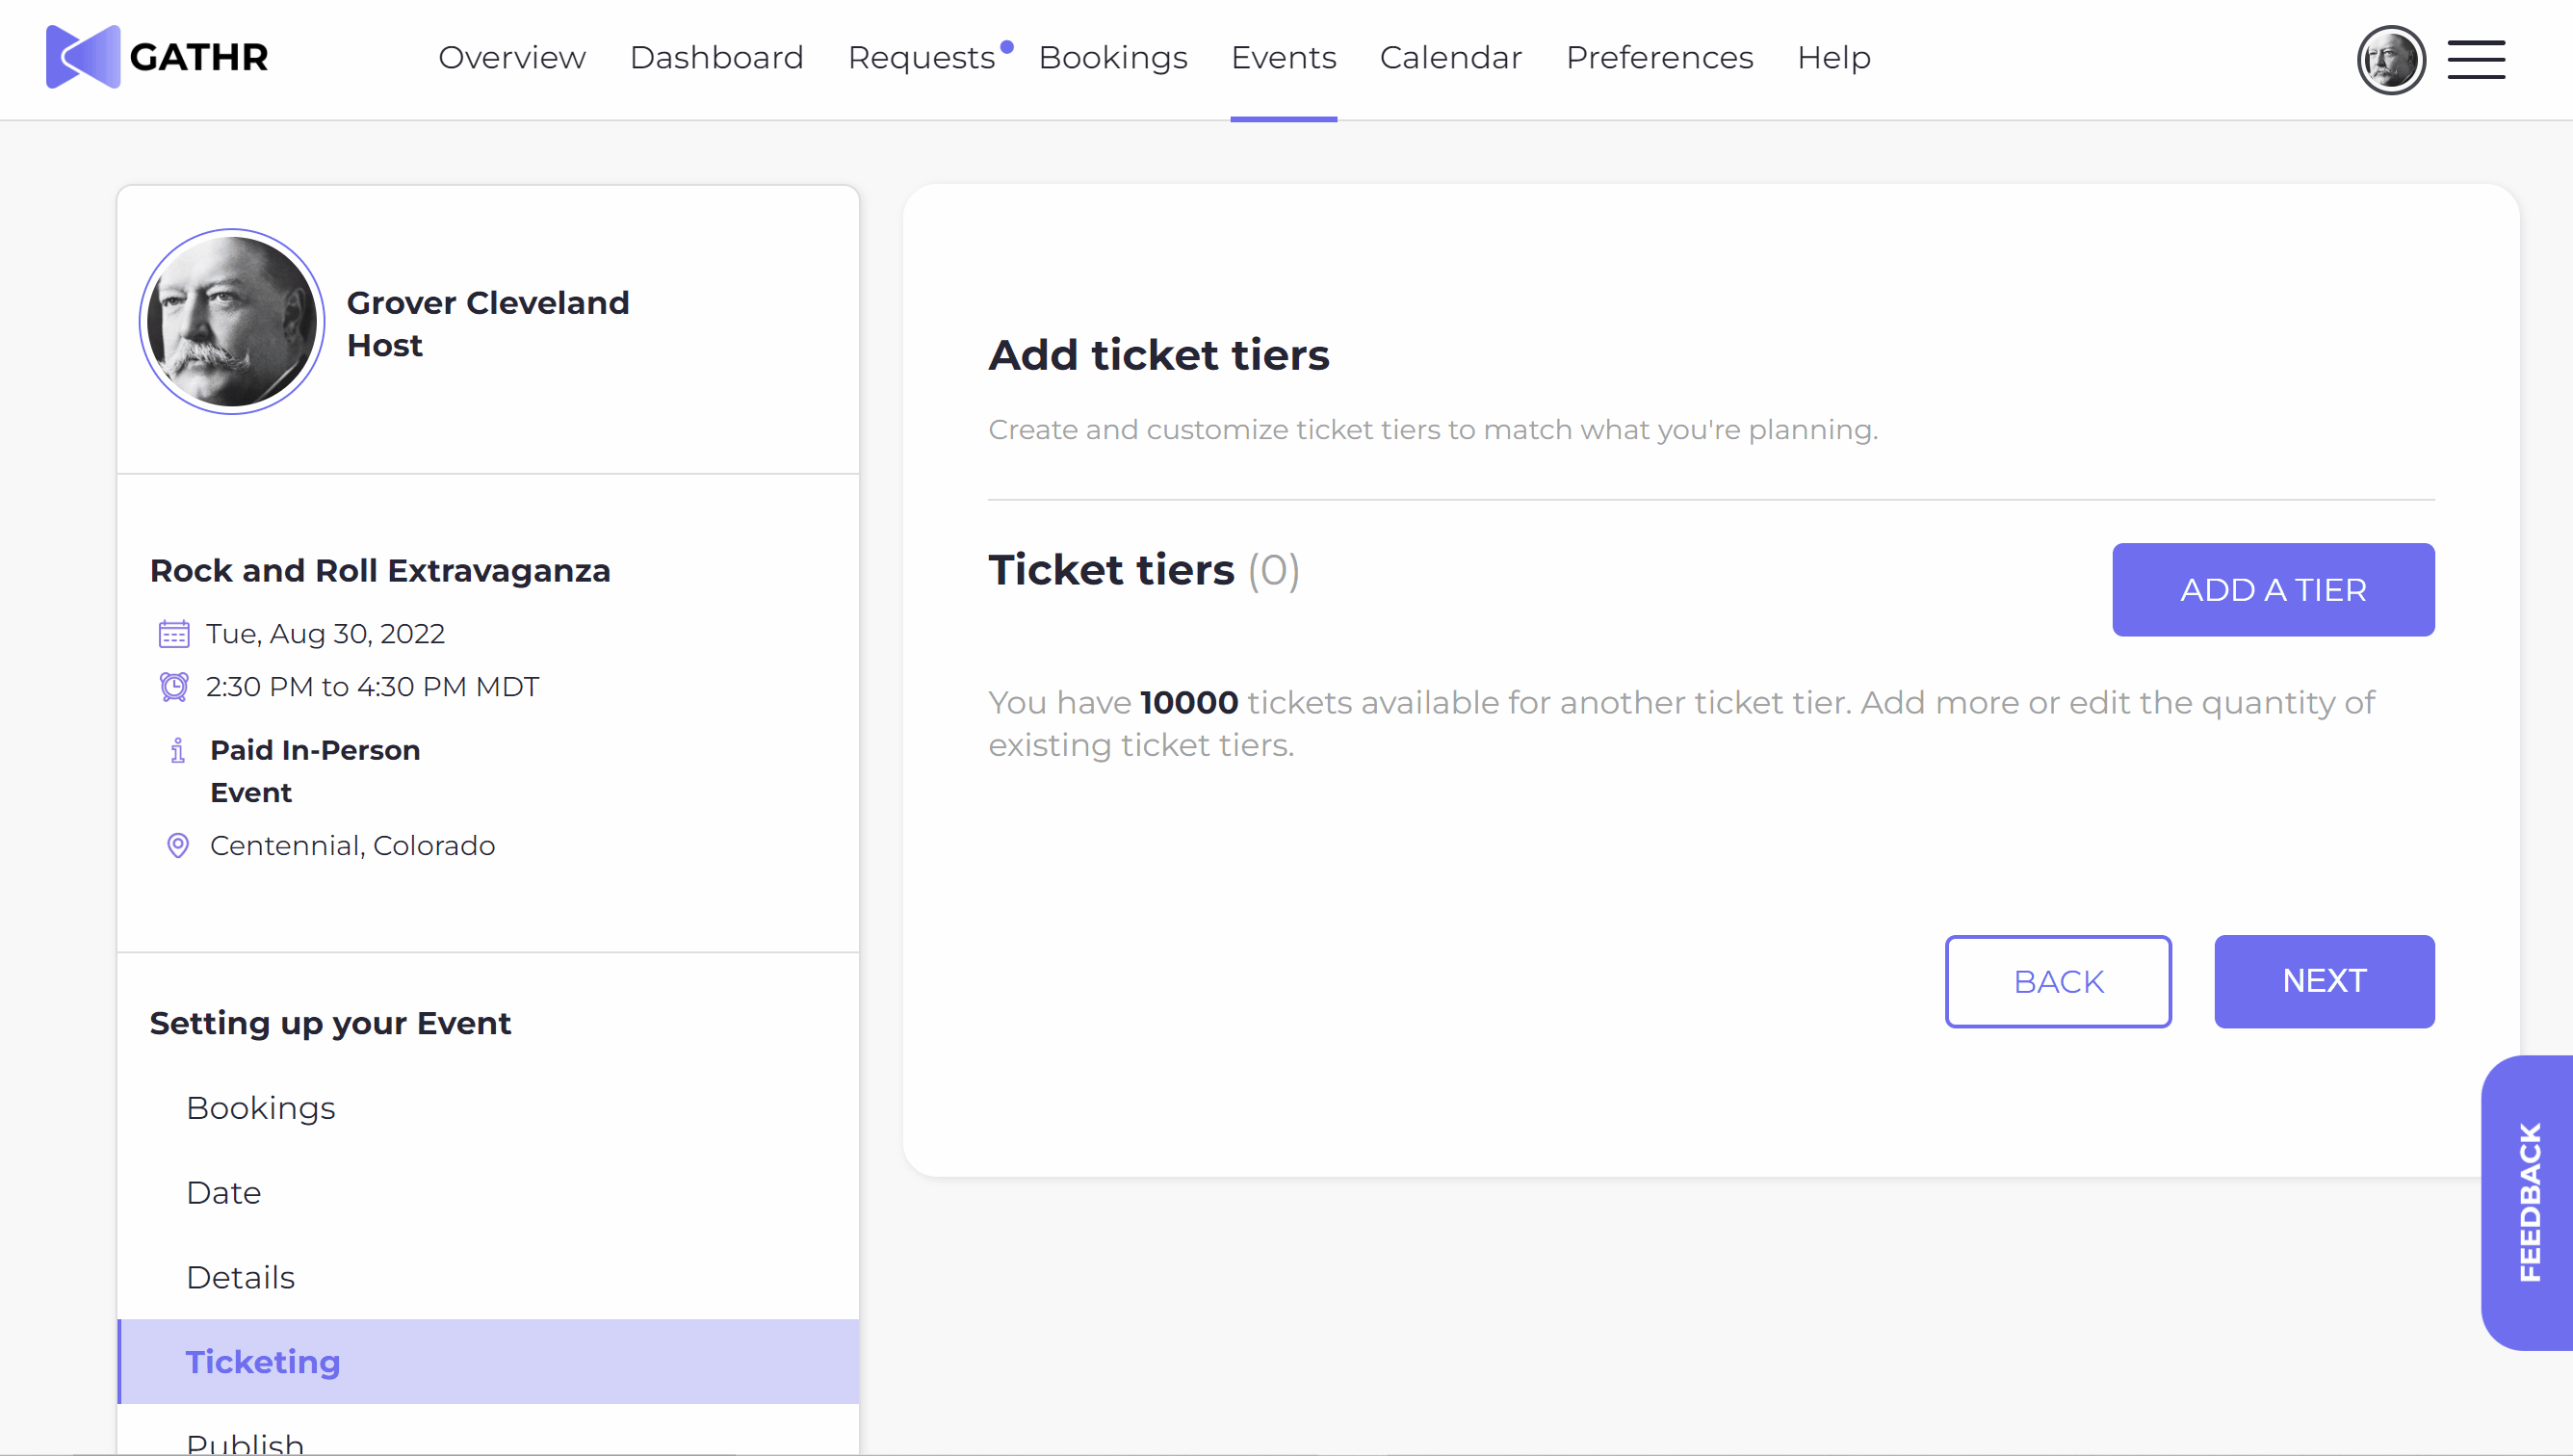 Add Ticket Tiers GIF updated